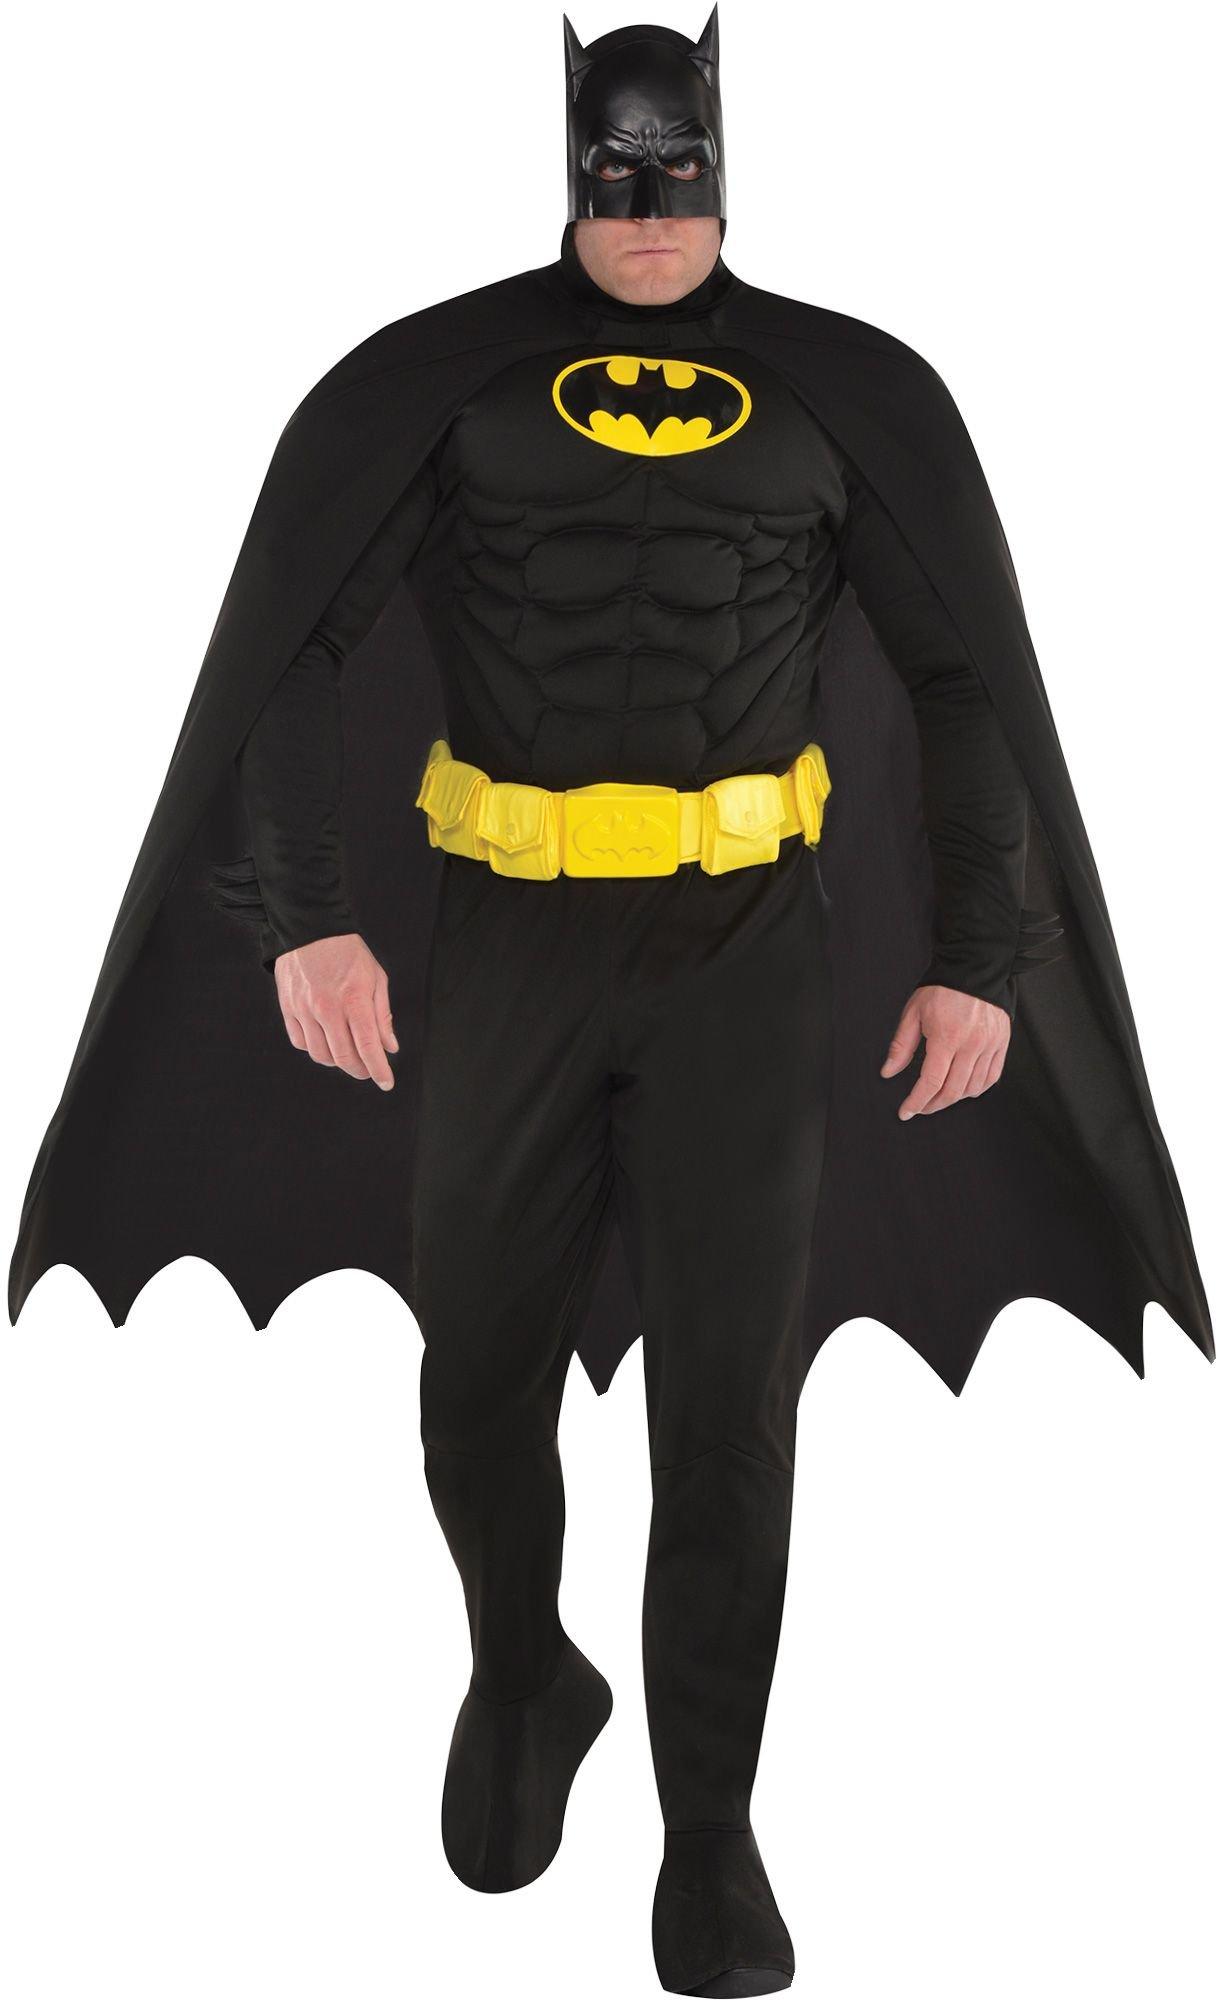 Officially Licensed The Batman Costumes Go on Sale